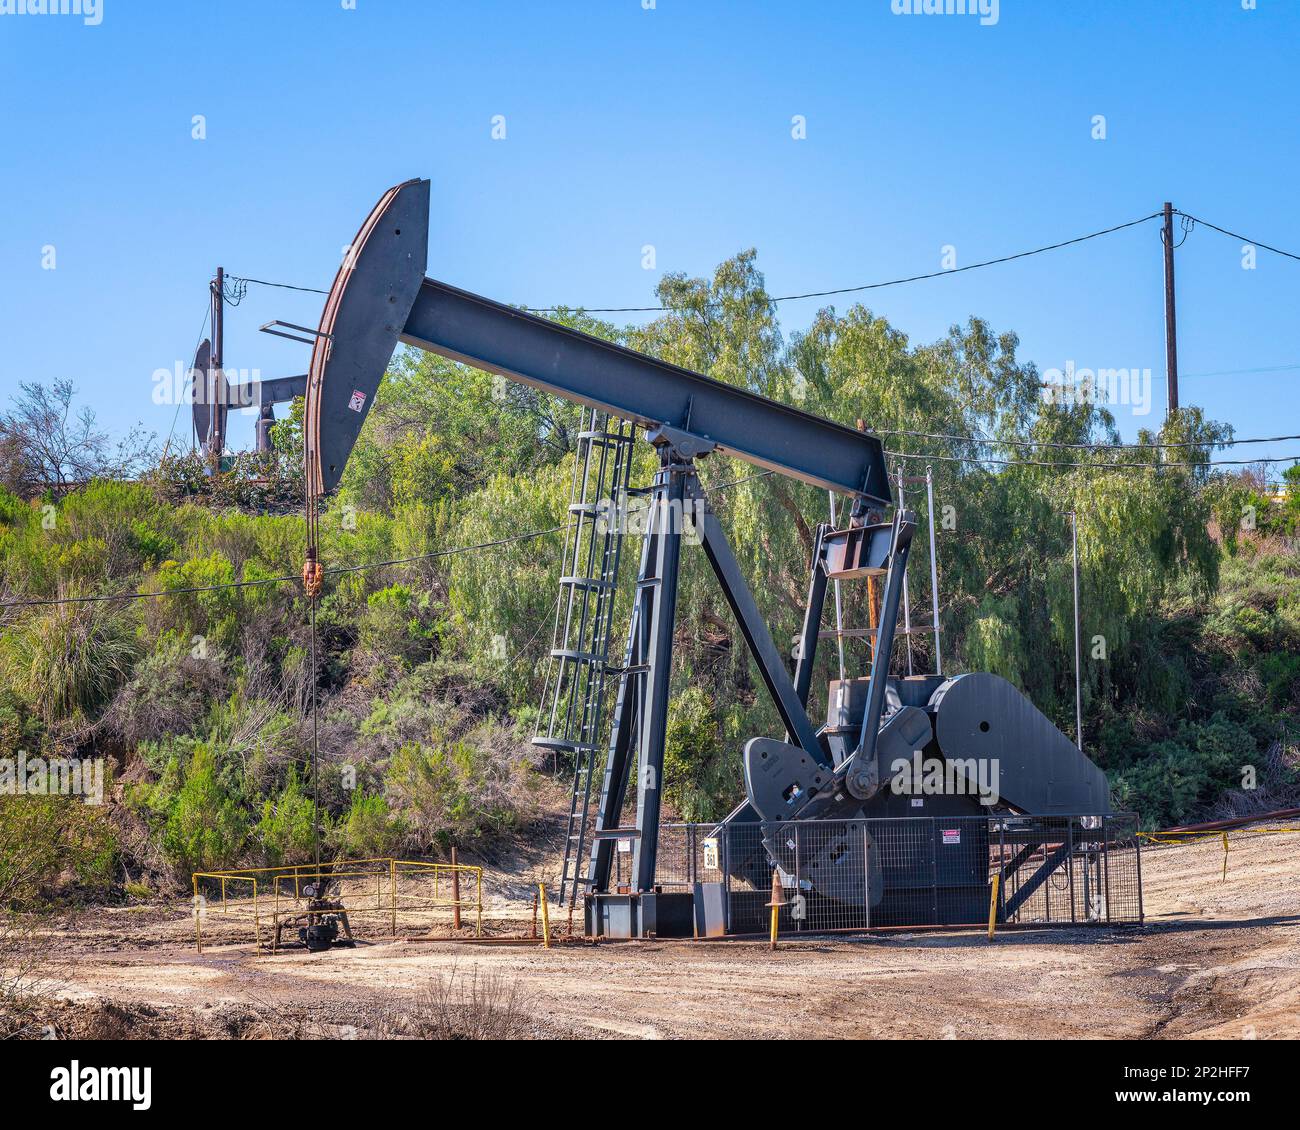 March 3, 2023, Los Angeles, CA, USA: Pumpjacks operate at the Inglewood Oil Field in Los Angeles, CA. It is the largest oil field in LA. Stock Photo